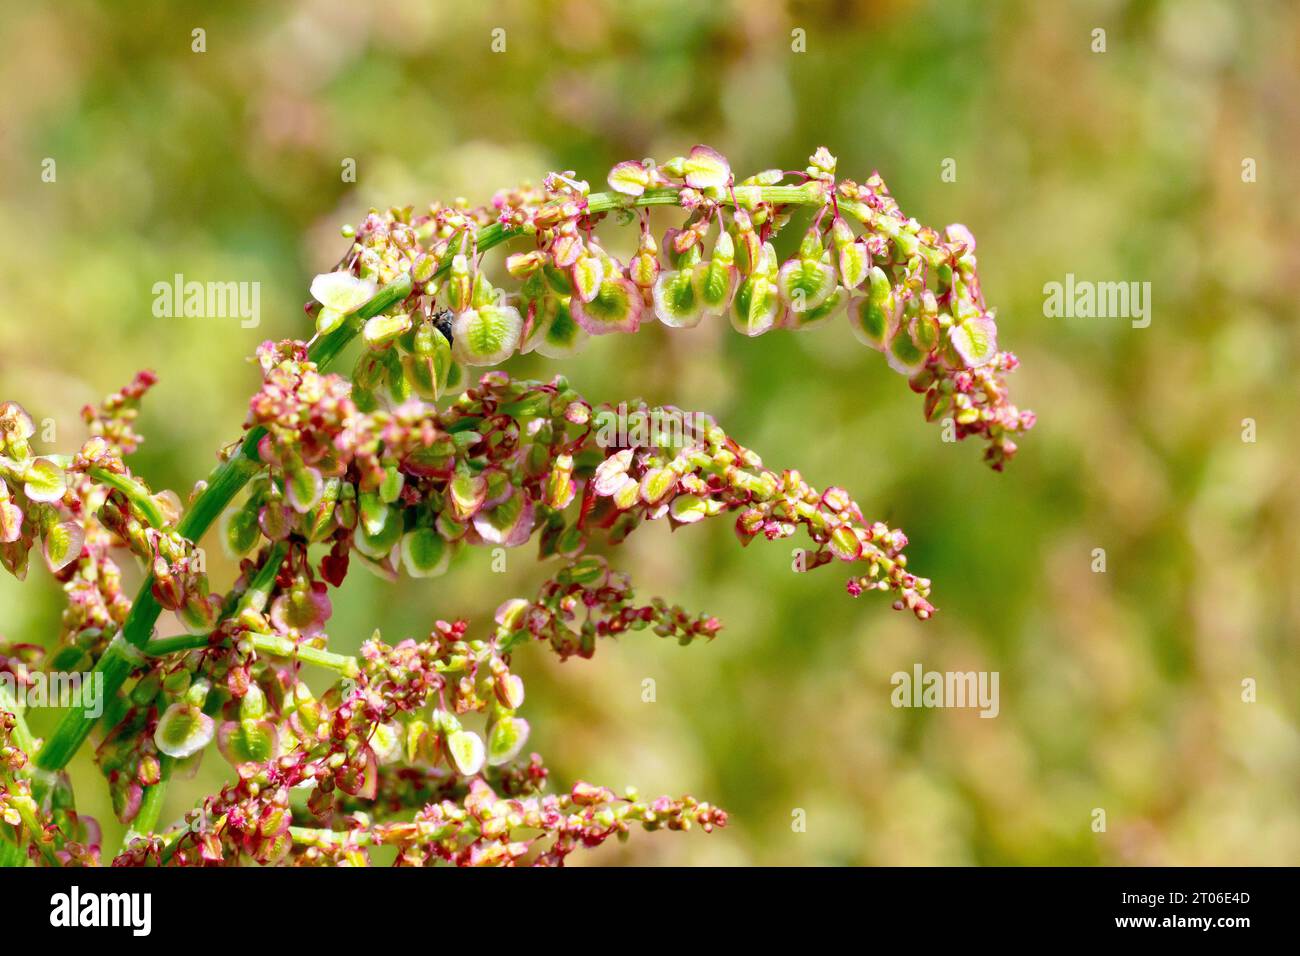 Common Sorrel (rumex acetosa), close up showing the winged seed capsules hanging on the plant after the flowers have died. Stock Photo